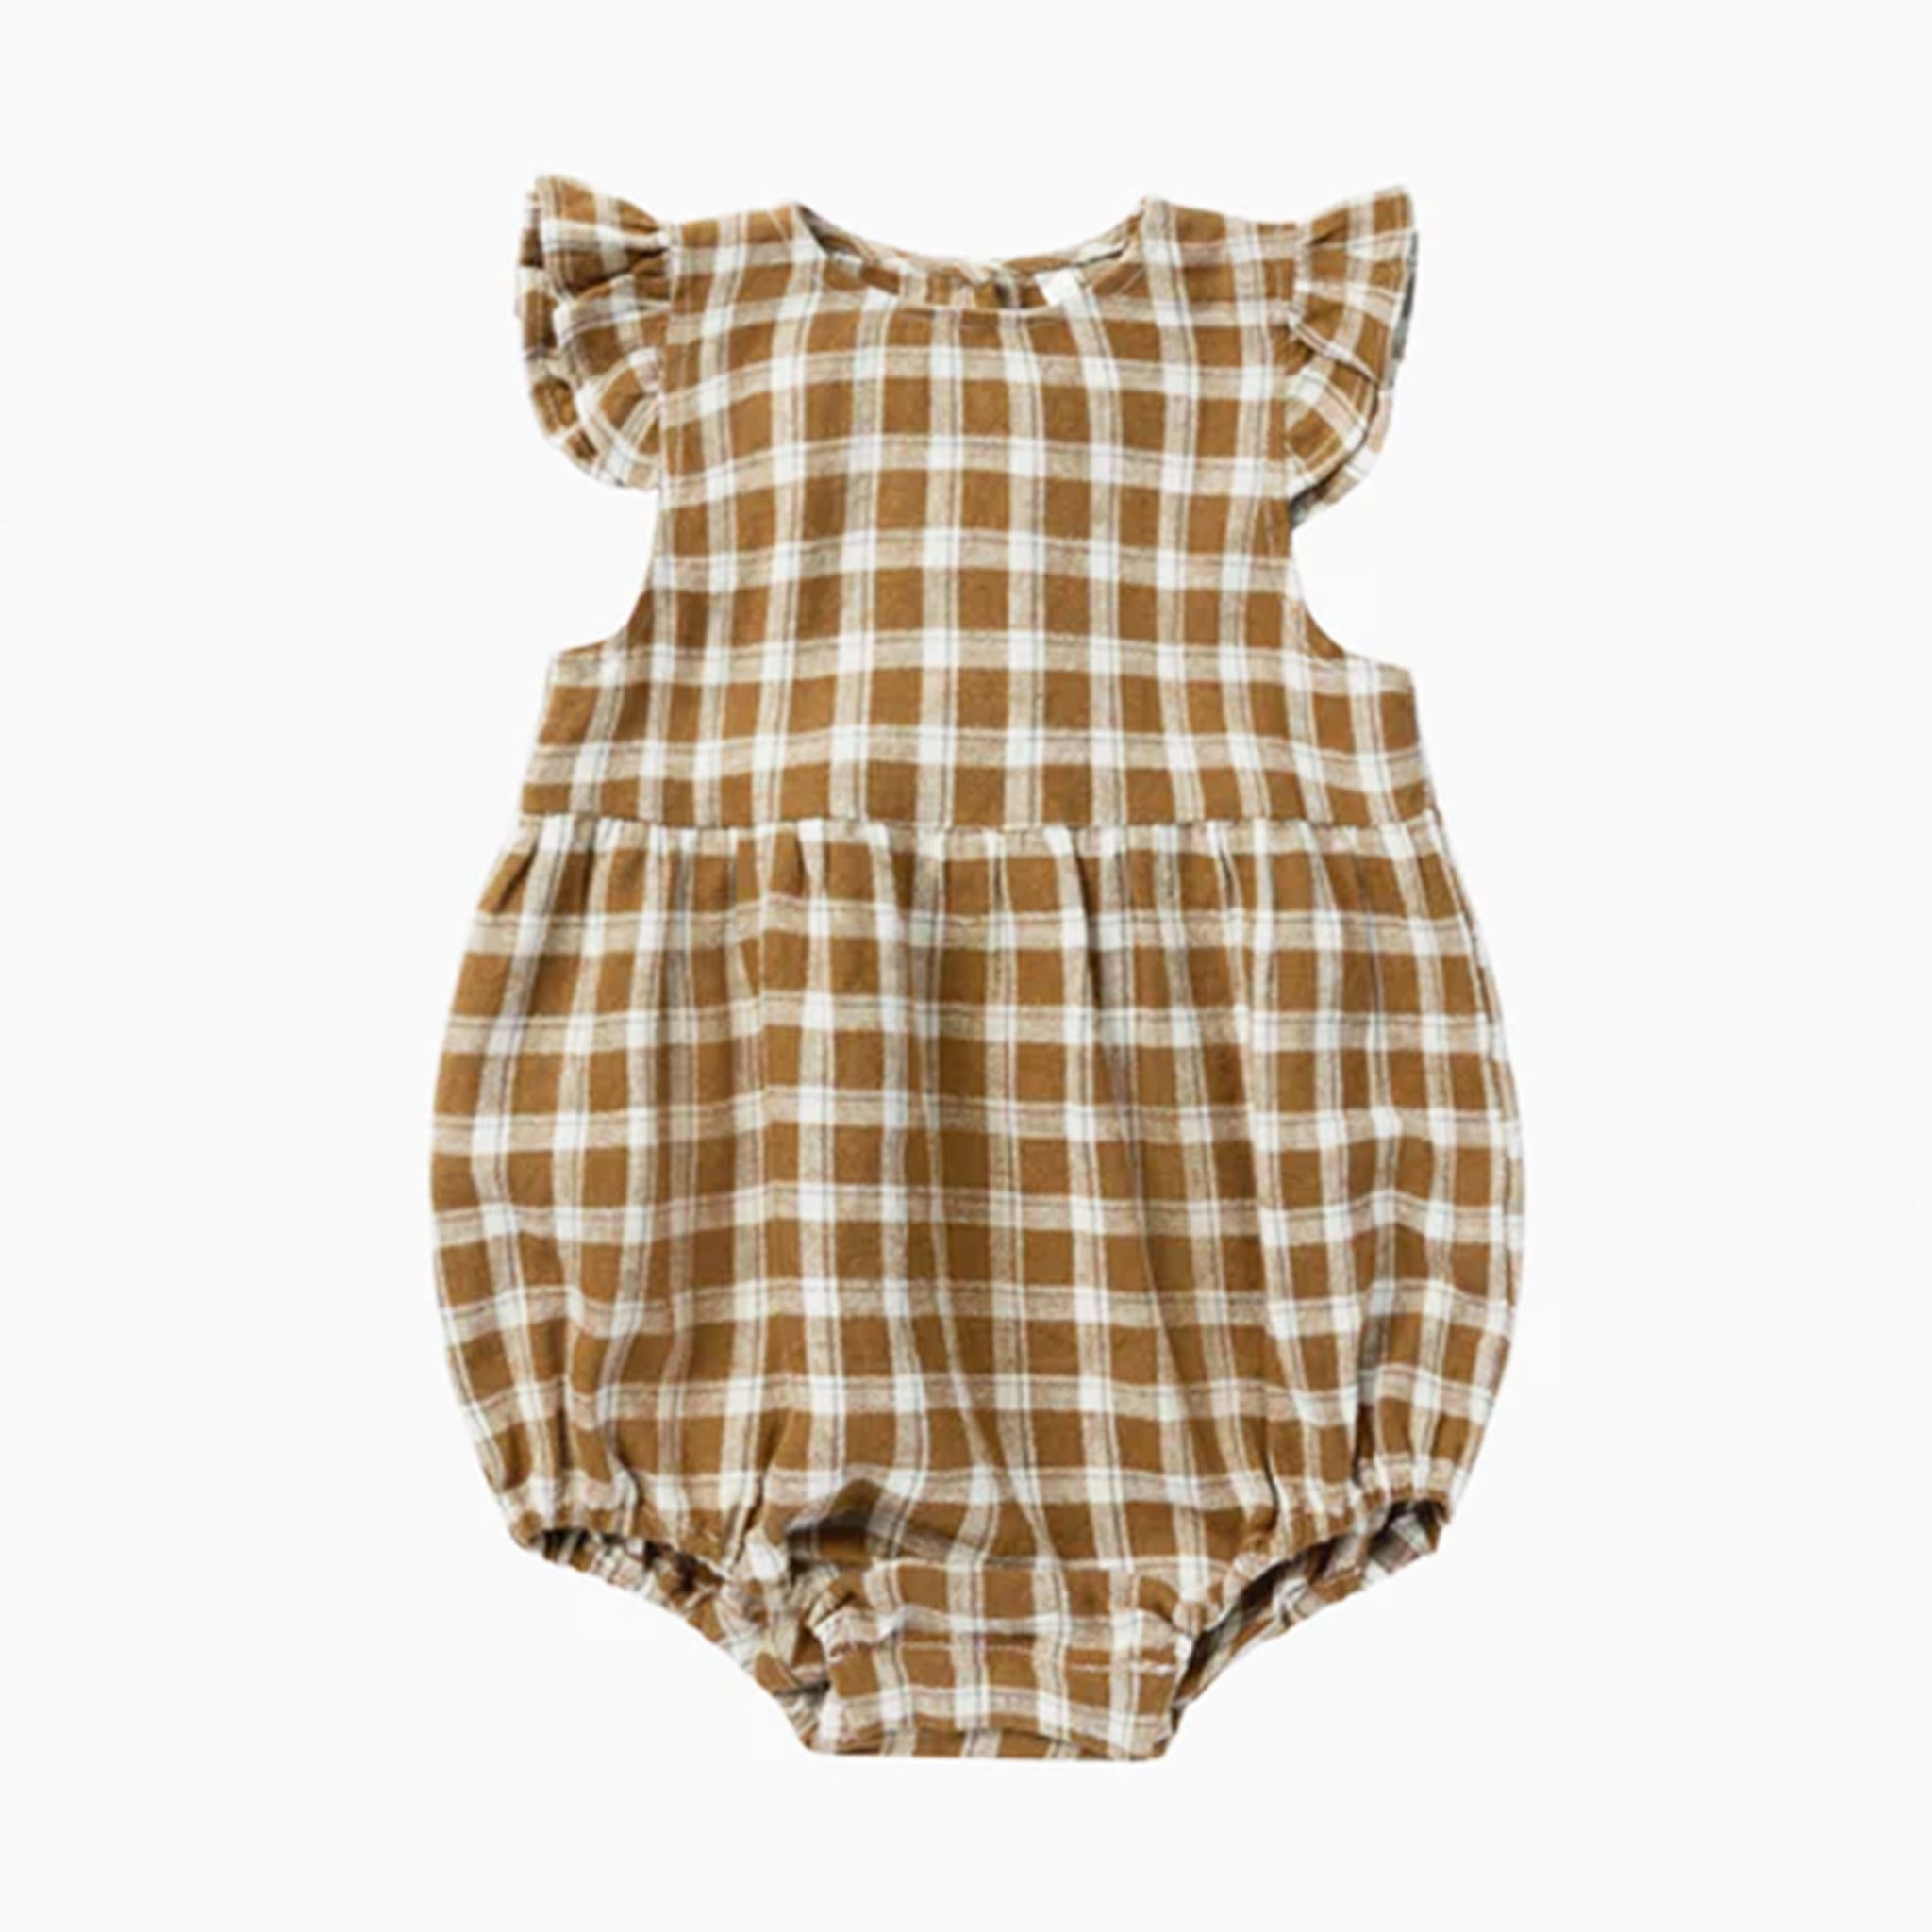 A brown and ivory plaid one piece romper with ruffle detials on the sleeves. Bonnet not included.